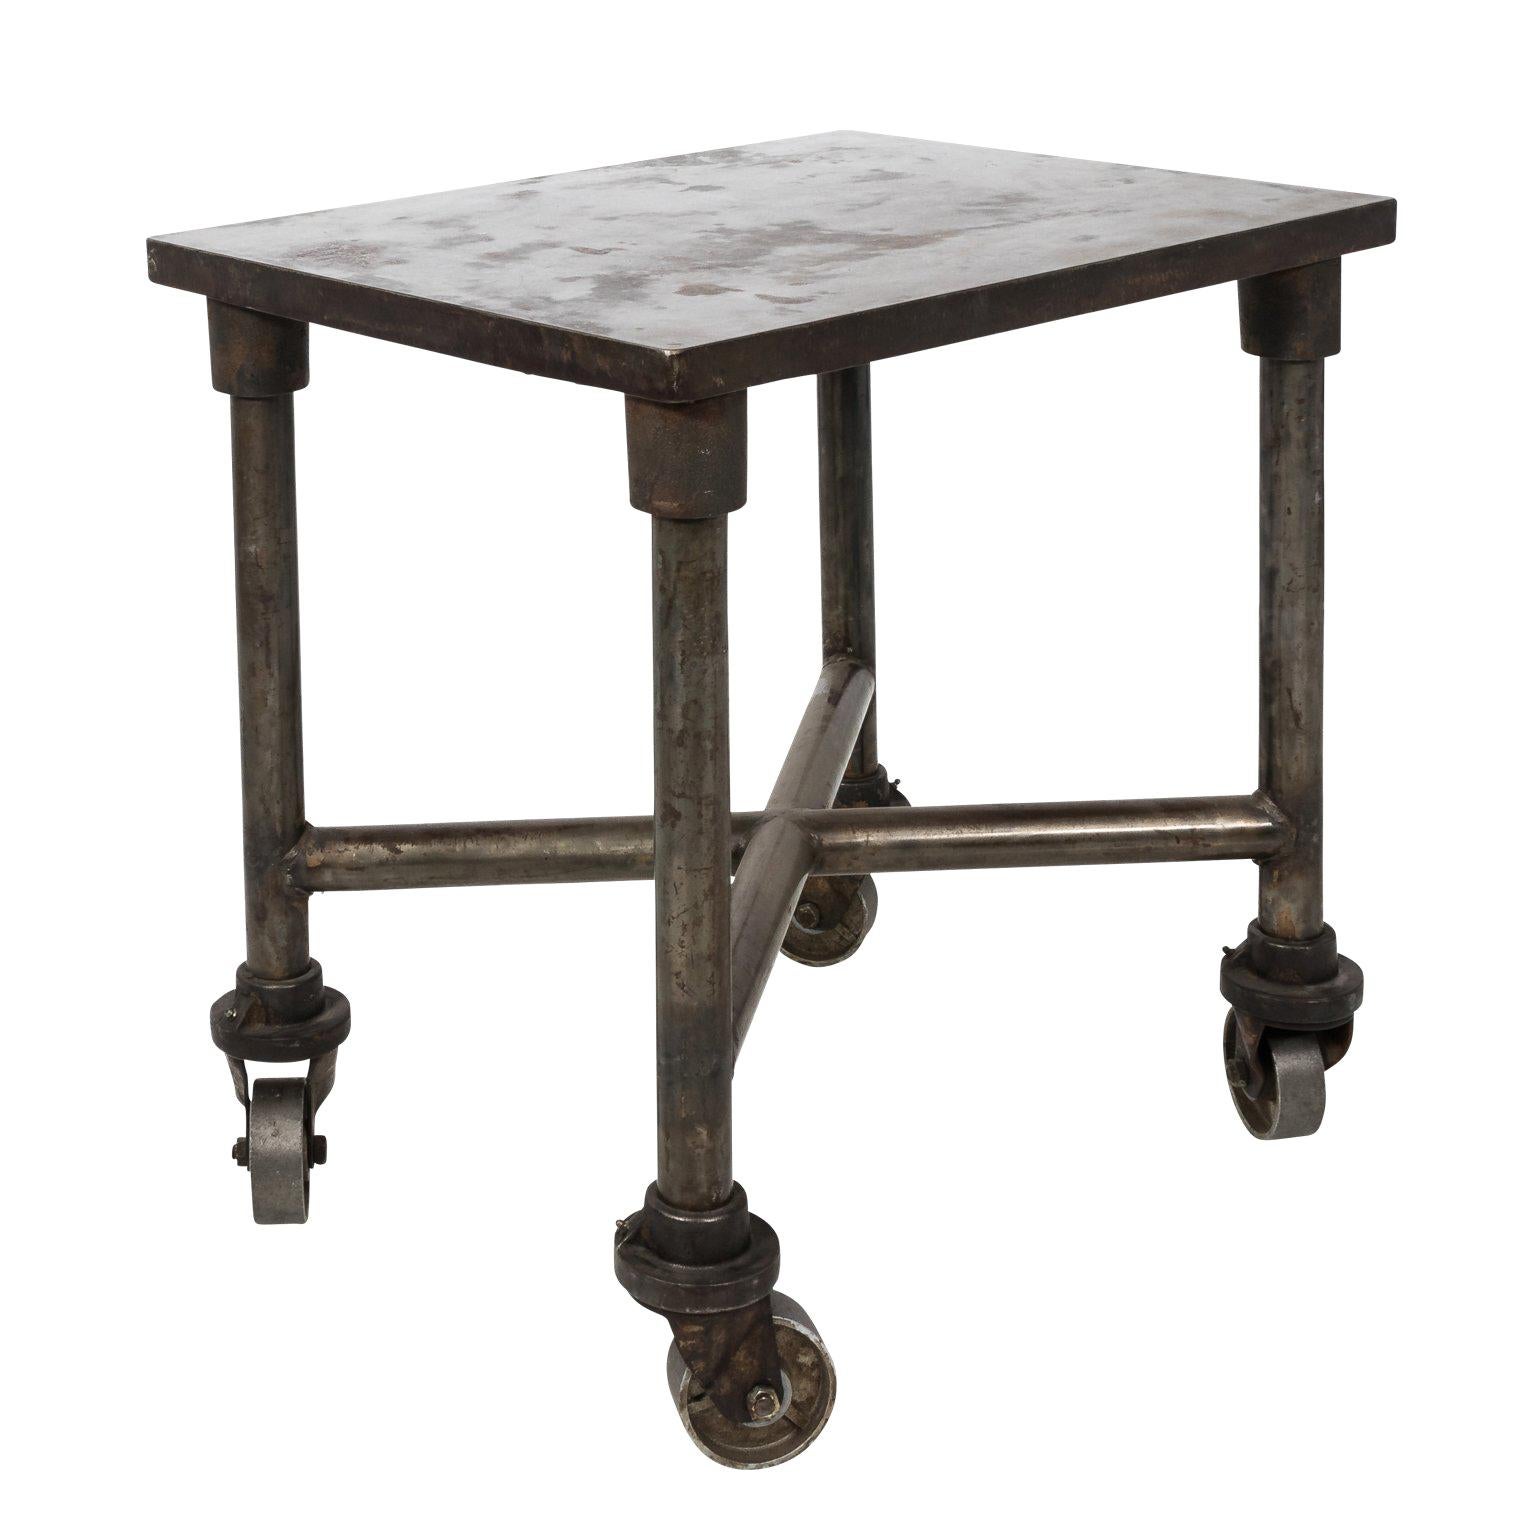 Early 20th Century Industrial Side Table